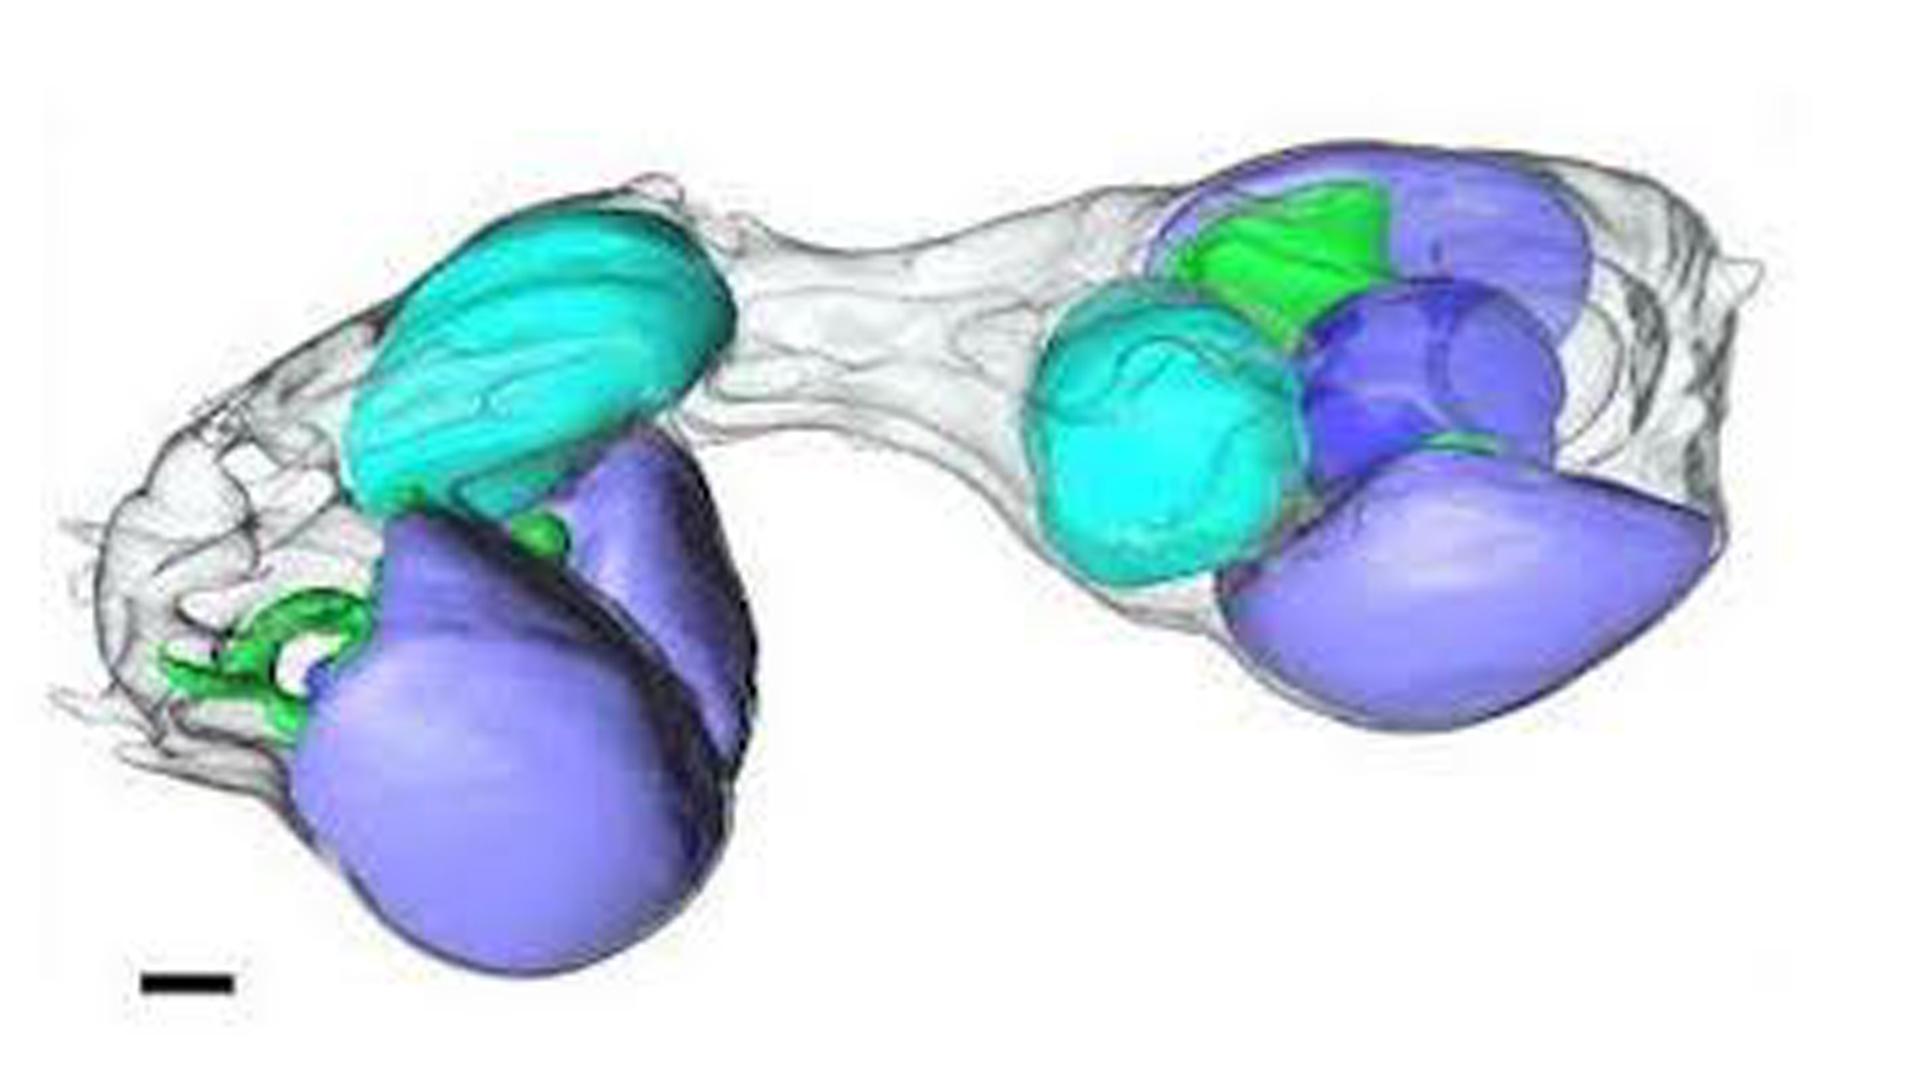 image shows a cell splitting with blobs of blue and green shown inside its structure